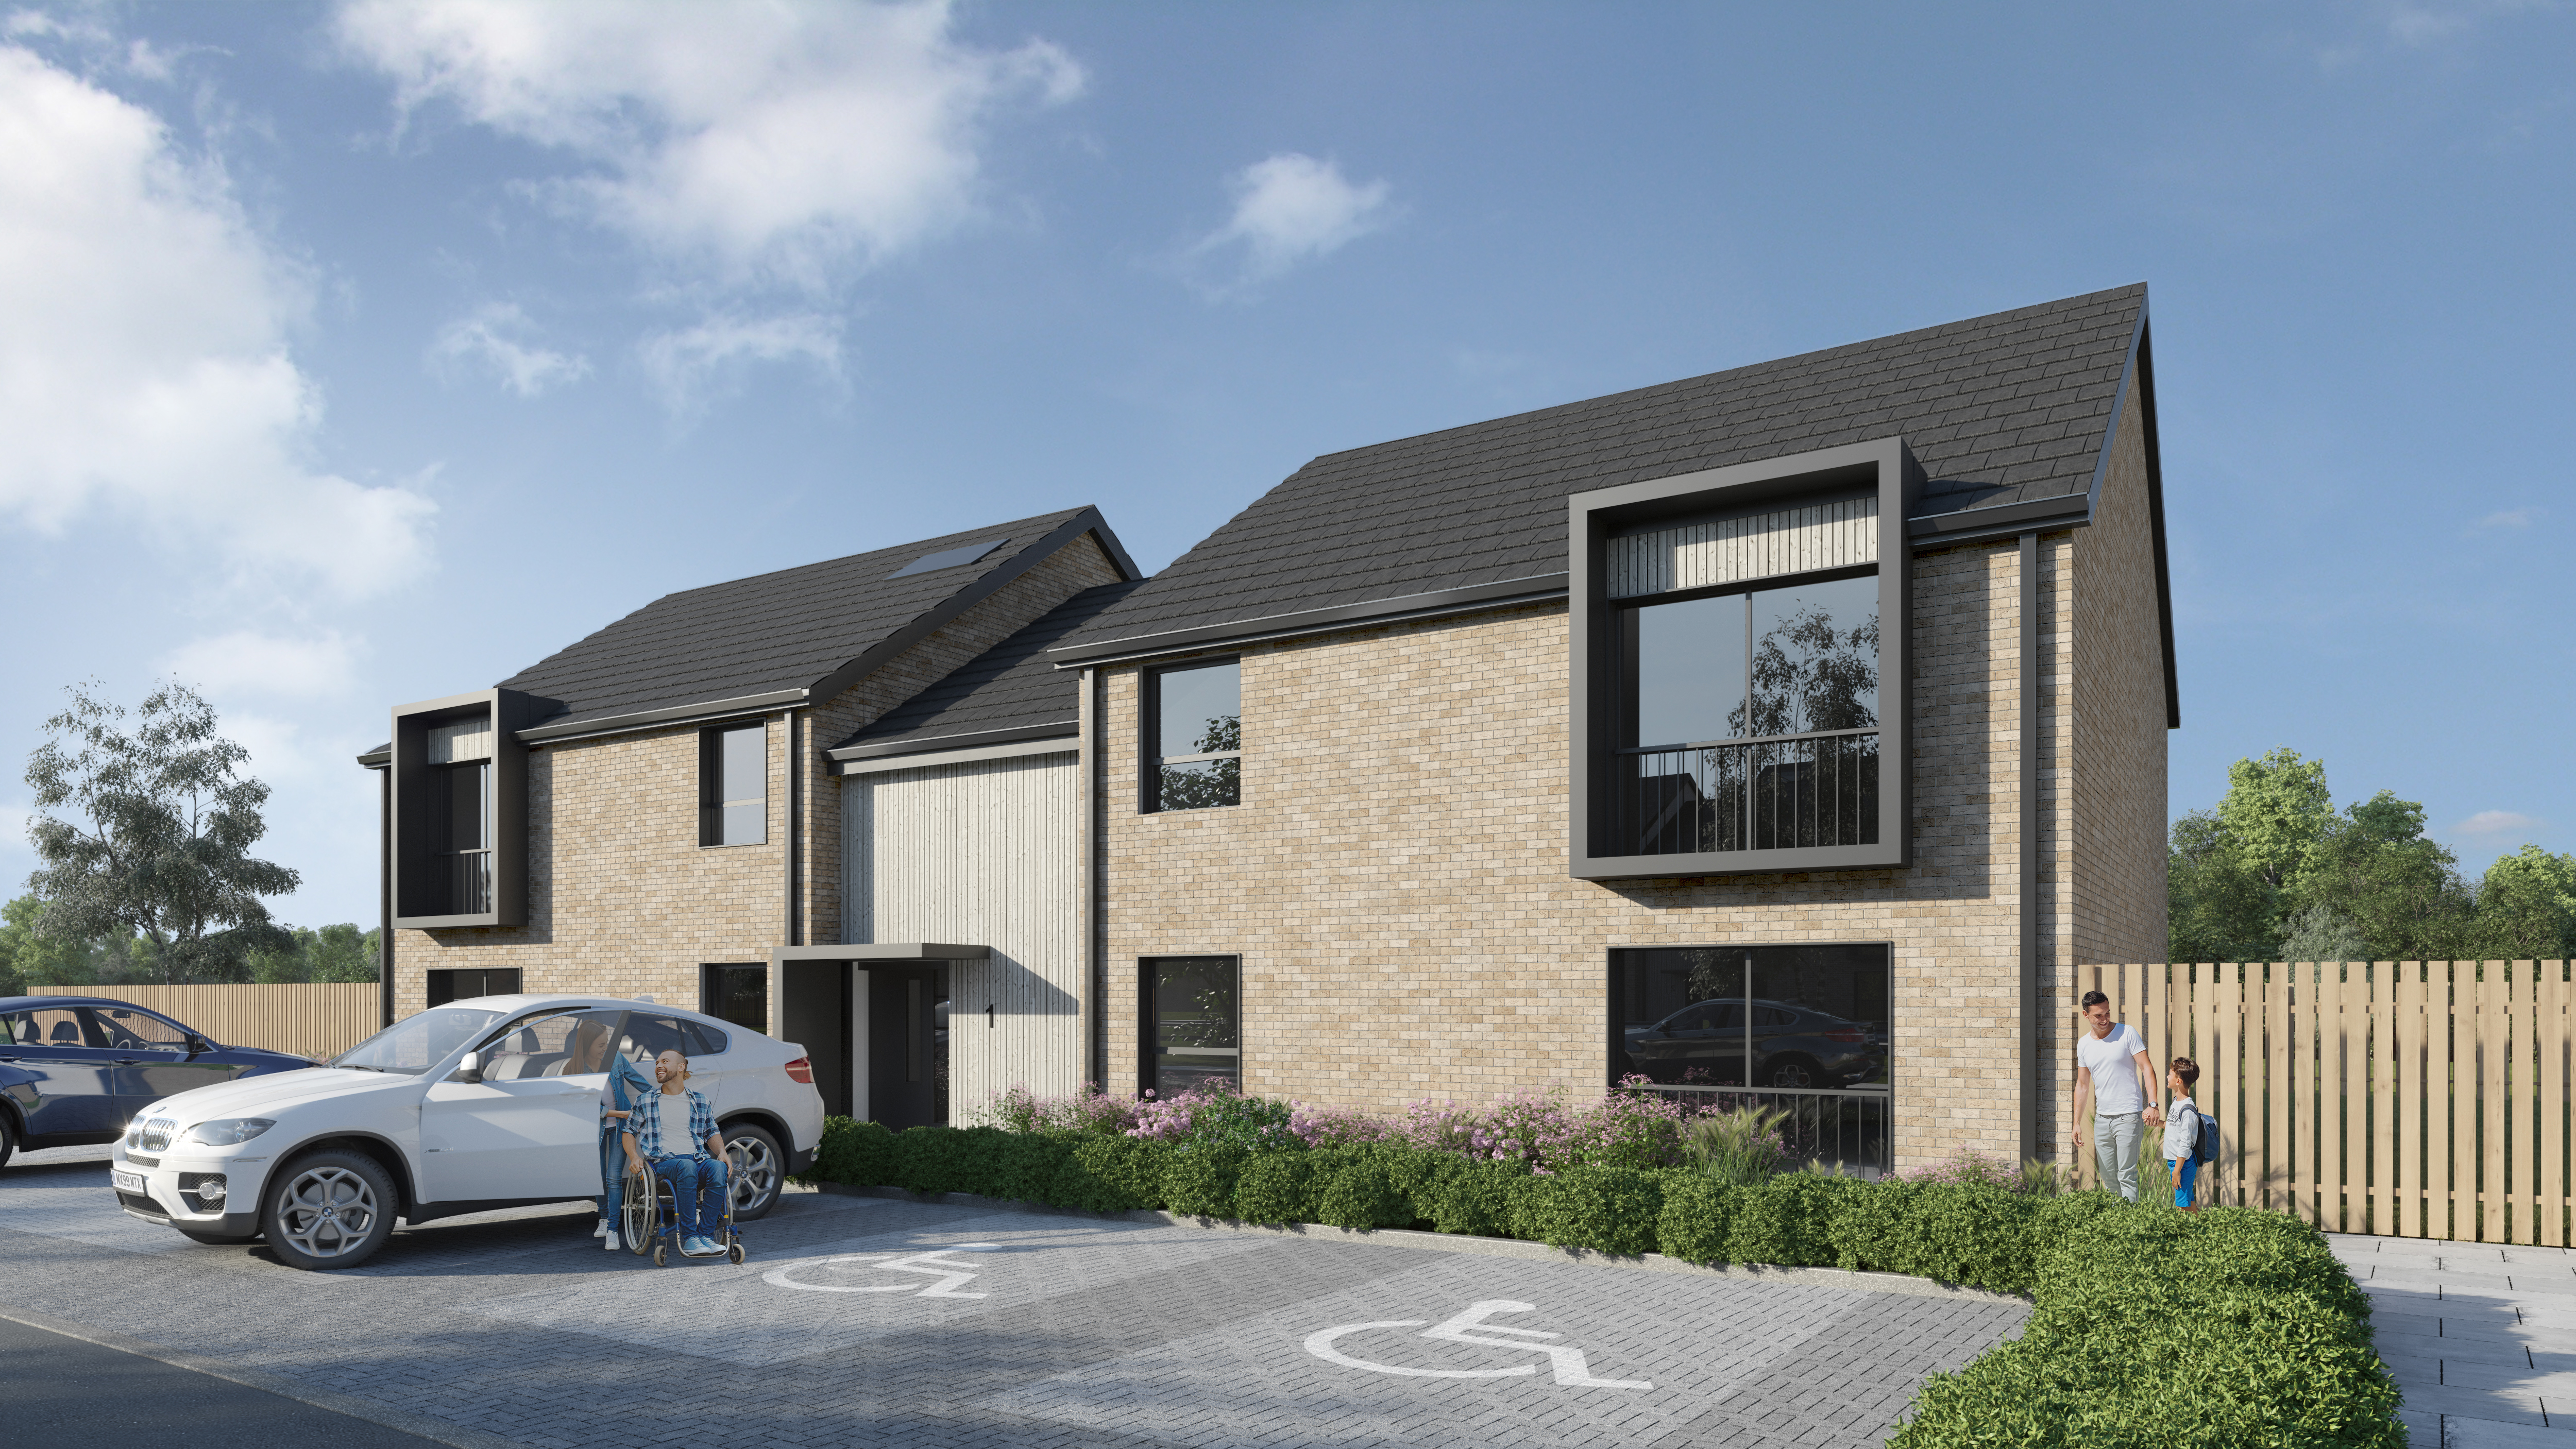 Campion appointed to deliver 66 specialist homes in Dundee